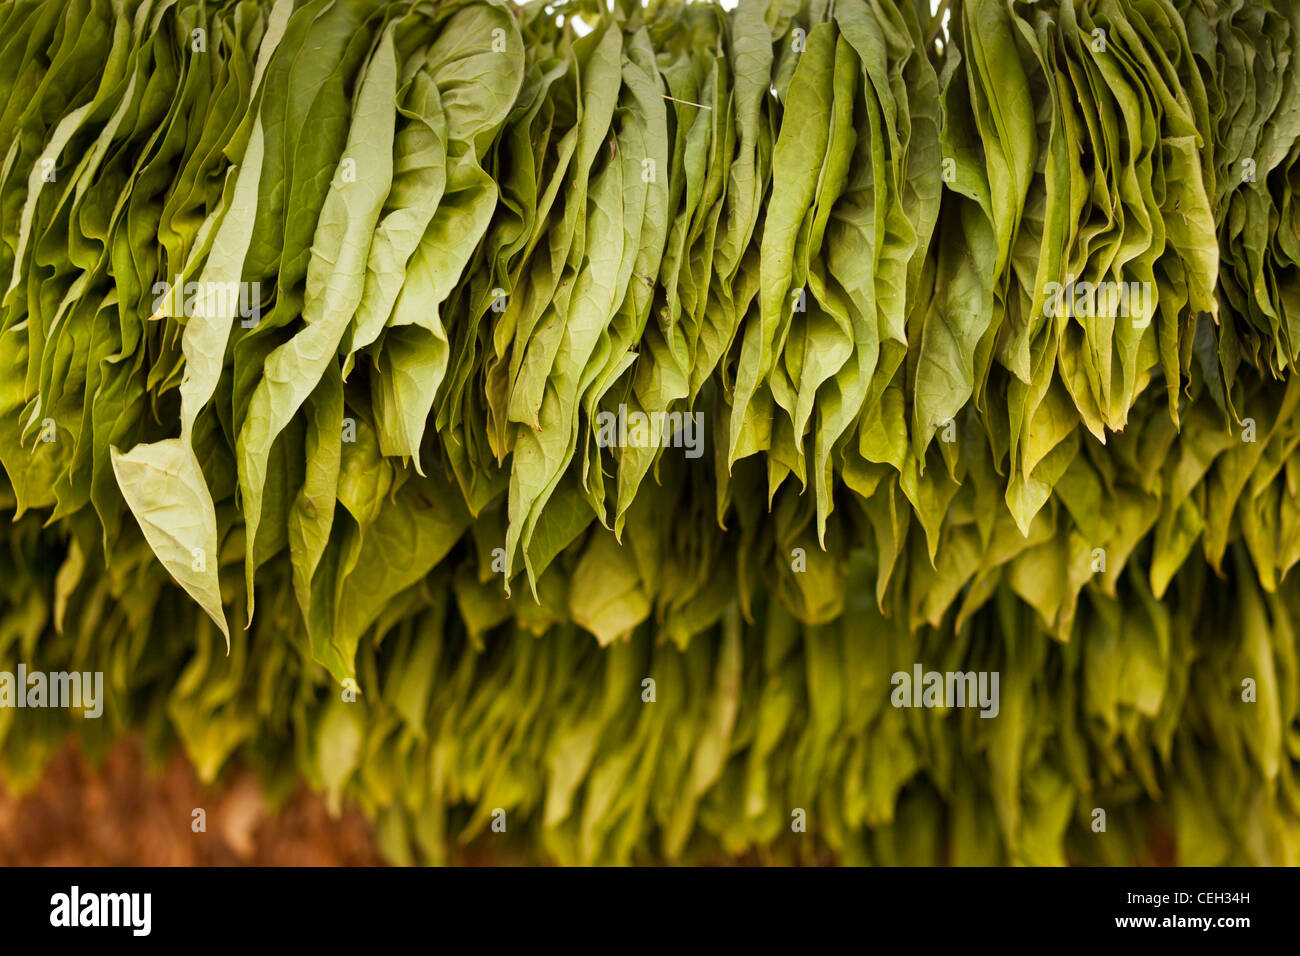 `green tobacco leaves,hanged up to dry Nicotiana sp. Stock Photo